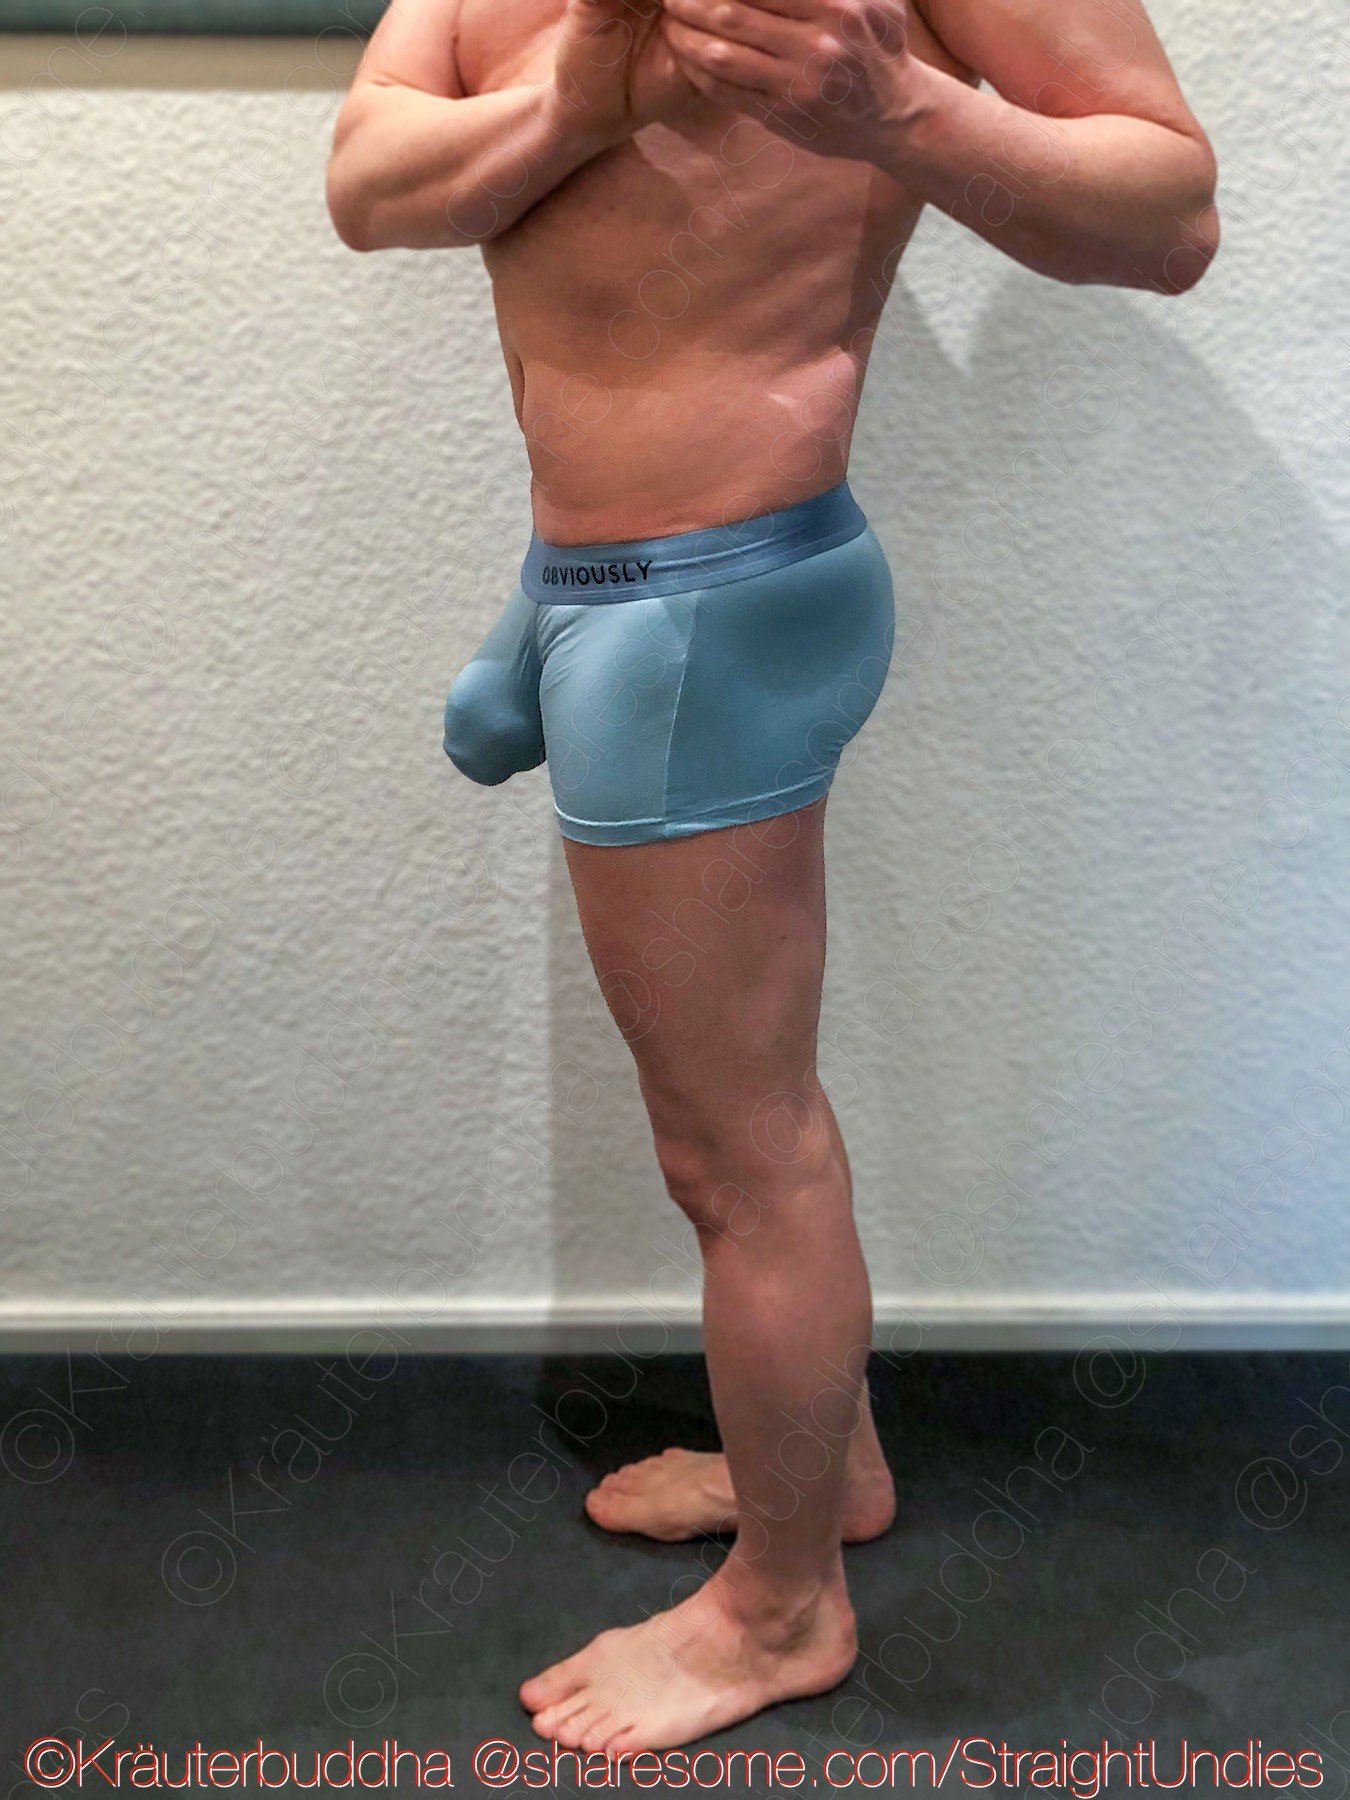 Watch the Photo by Kräuterbuddha with the username @StraightUndies, who is a verified user, posted on January 18, 2019. The post is about the topic Straight Underwear. and the text says 'New Obviously Trunks
#underwear #mensunderwear #trunks #obviously'